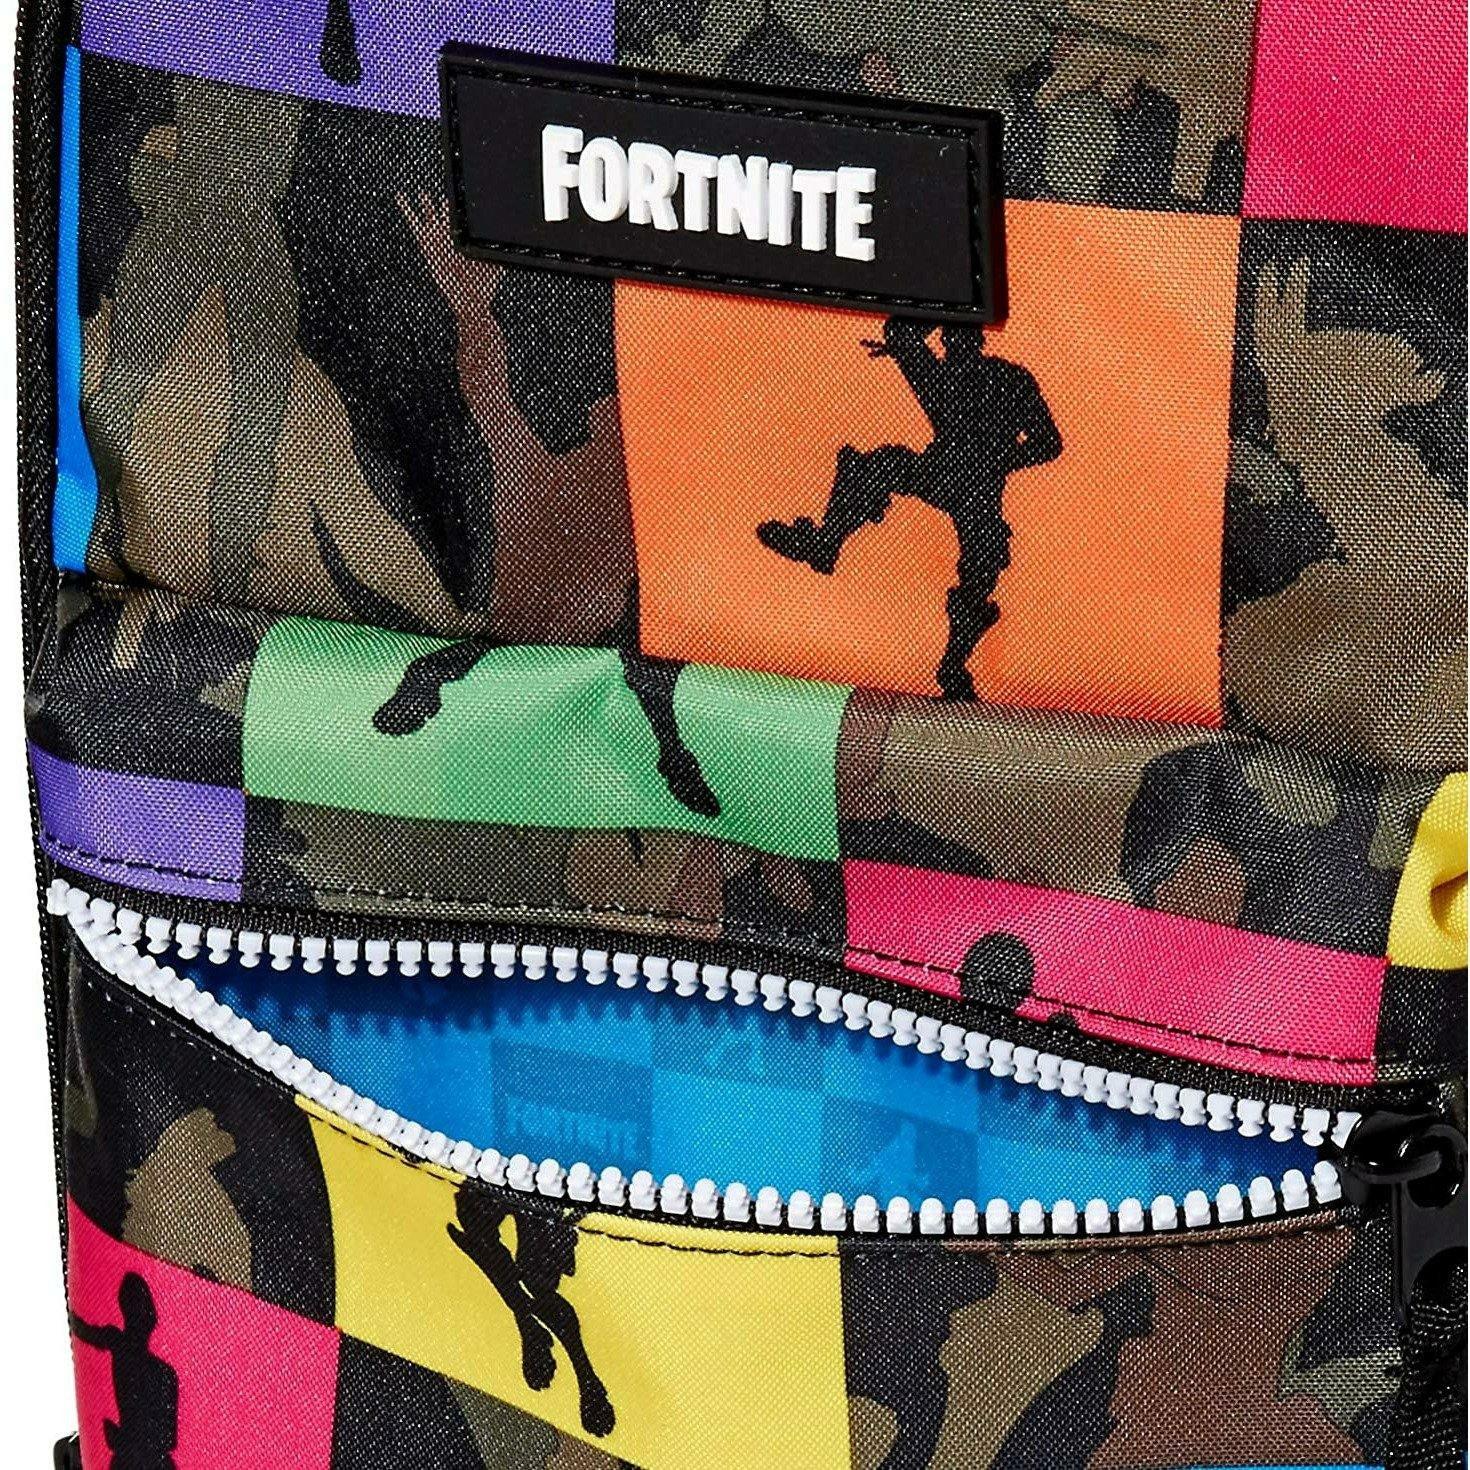 FORTNITE Lunch bag Kit 11 inch - BumbleToys - 2-4 Years, bags, Fortnite, Lunch Bag, Lunch Box, OXE, School Supplies